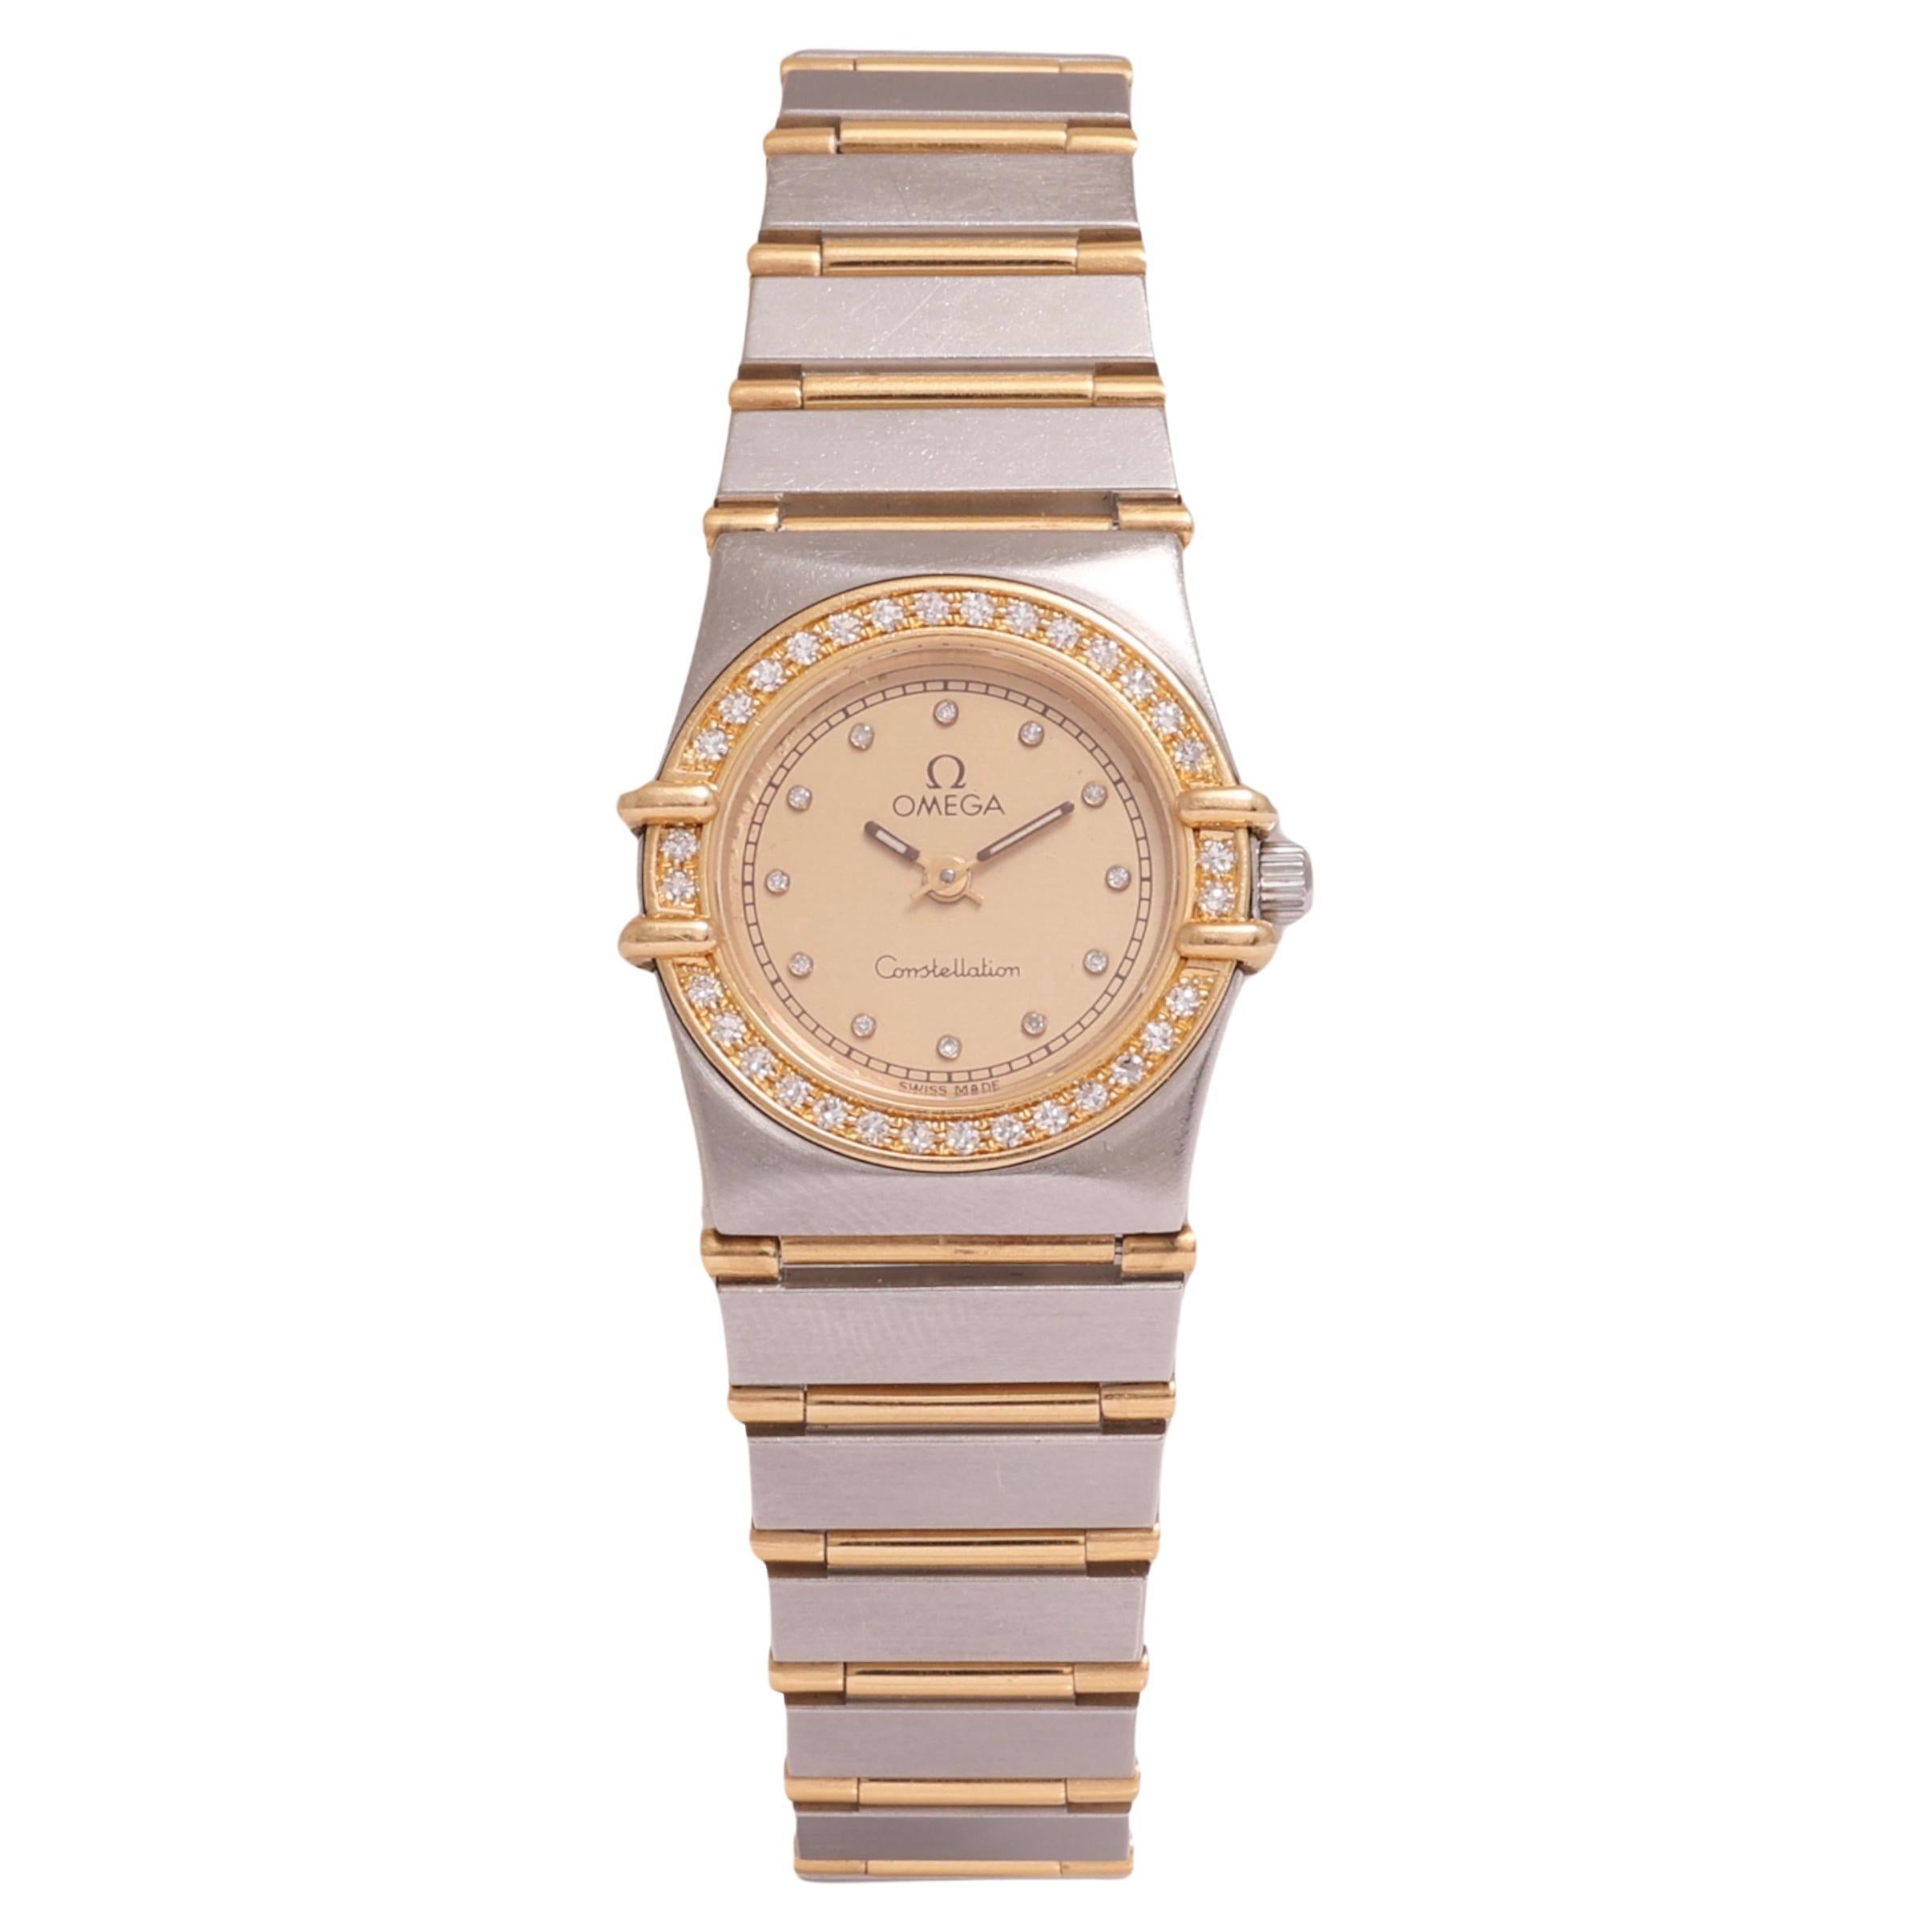 Omega Constellation Quartz Wristwatch, Gold & Steel, Diameter 24 mm

Model: Constellation quartz

Movement: Quartz

Case: Gold / Steel case, Diameter 24 mm, Thickness 5 mm, The case is fitted with an 18K yellow gold bezel set with diamonds, sapphire